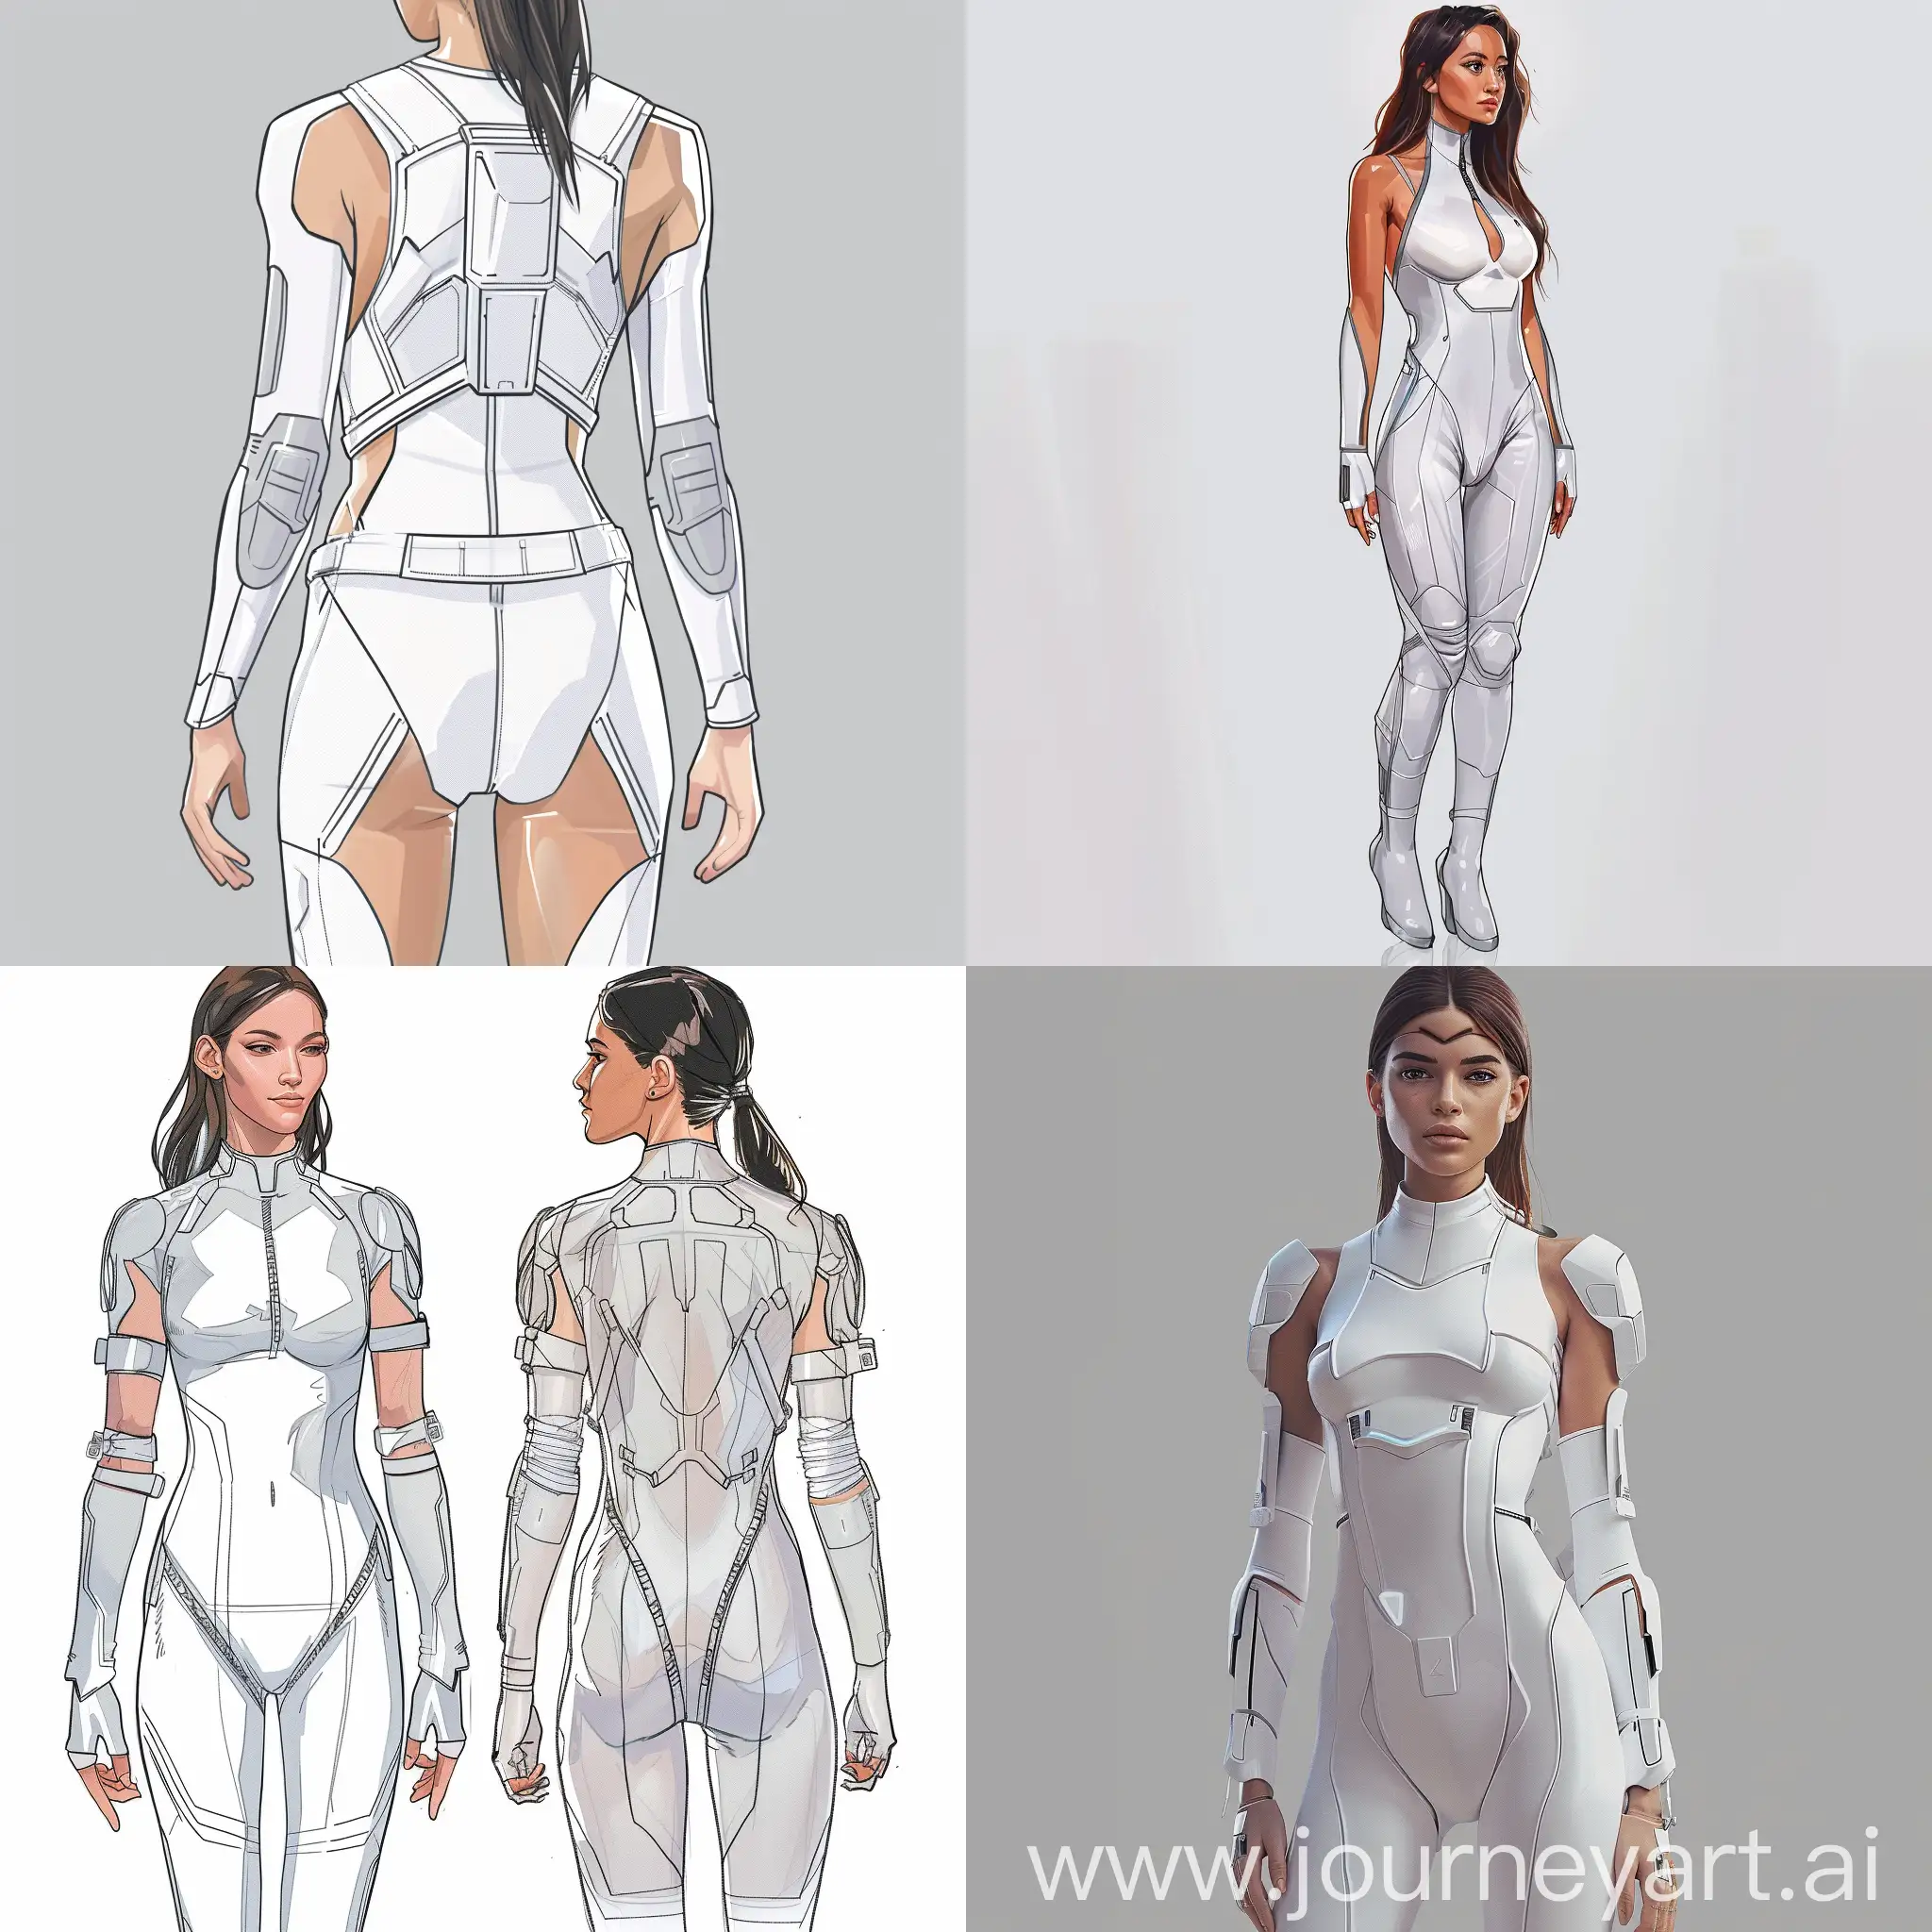 draw a female model wearing a women's white bodysuit. this bodysuit should be traditional, with a futuristic design, modern aesthetic, sci-fi twist. it should not include tech to illustrate the futuristic aspect, so no panels, no screens, no lights, nothing like that, just modern looking cuts, shapes, sleek lines and such.